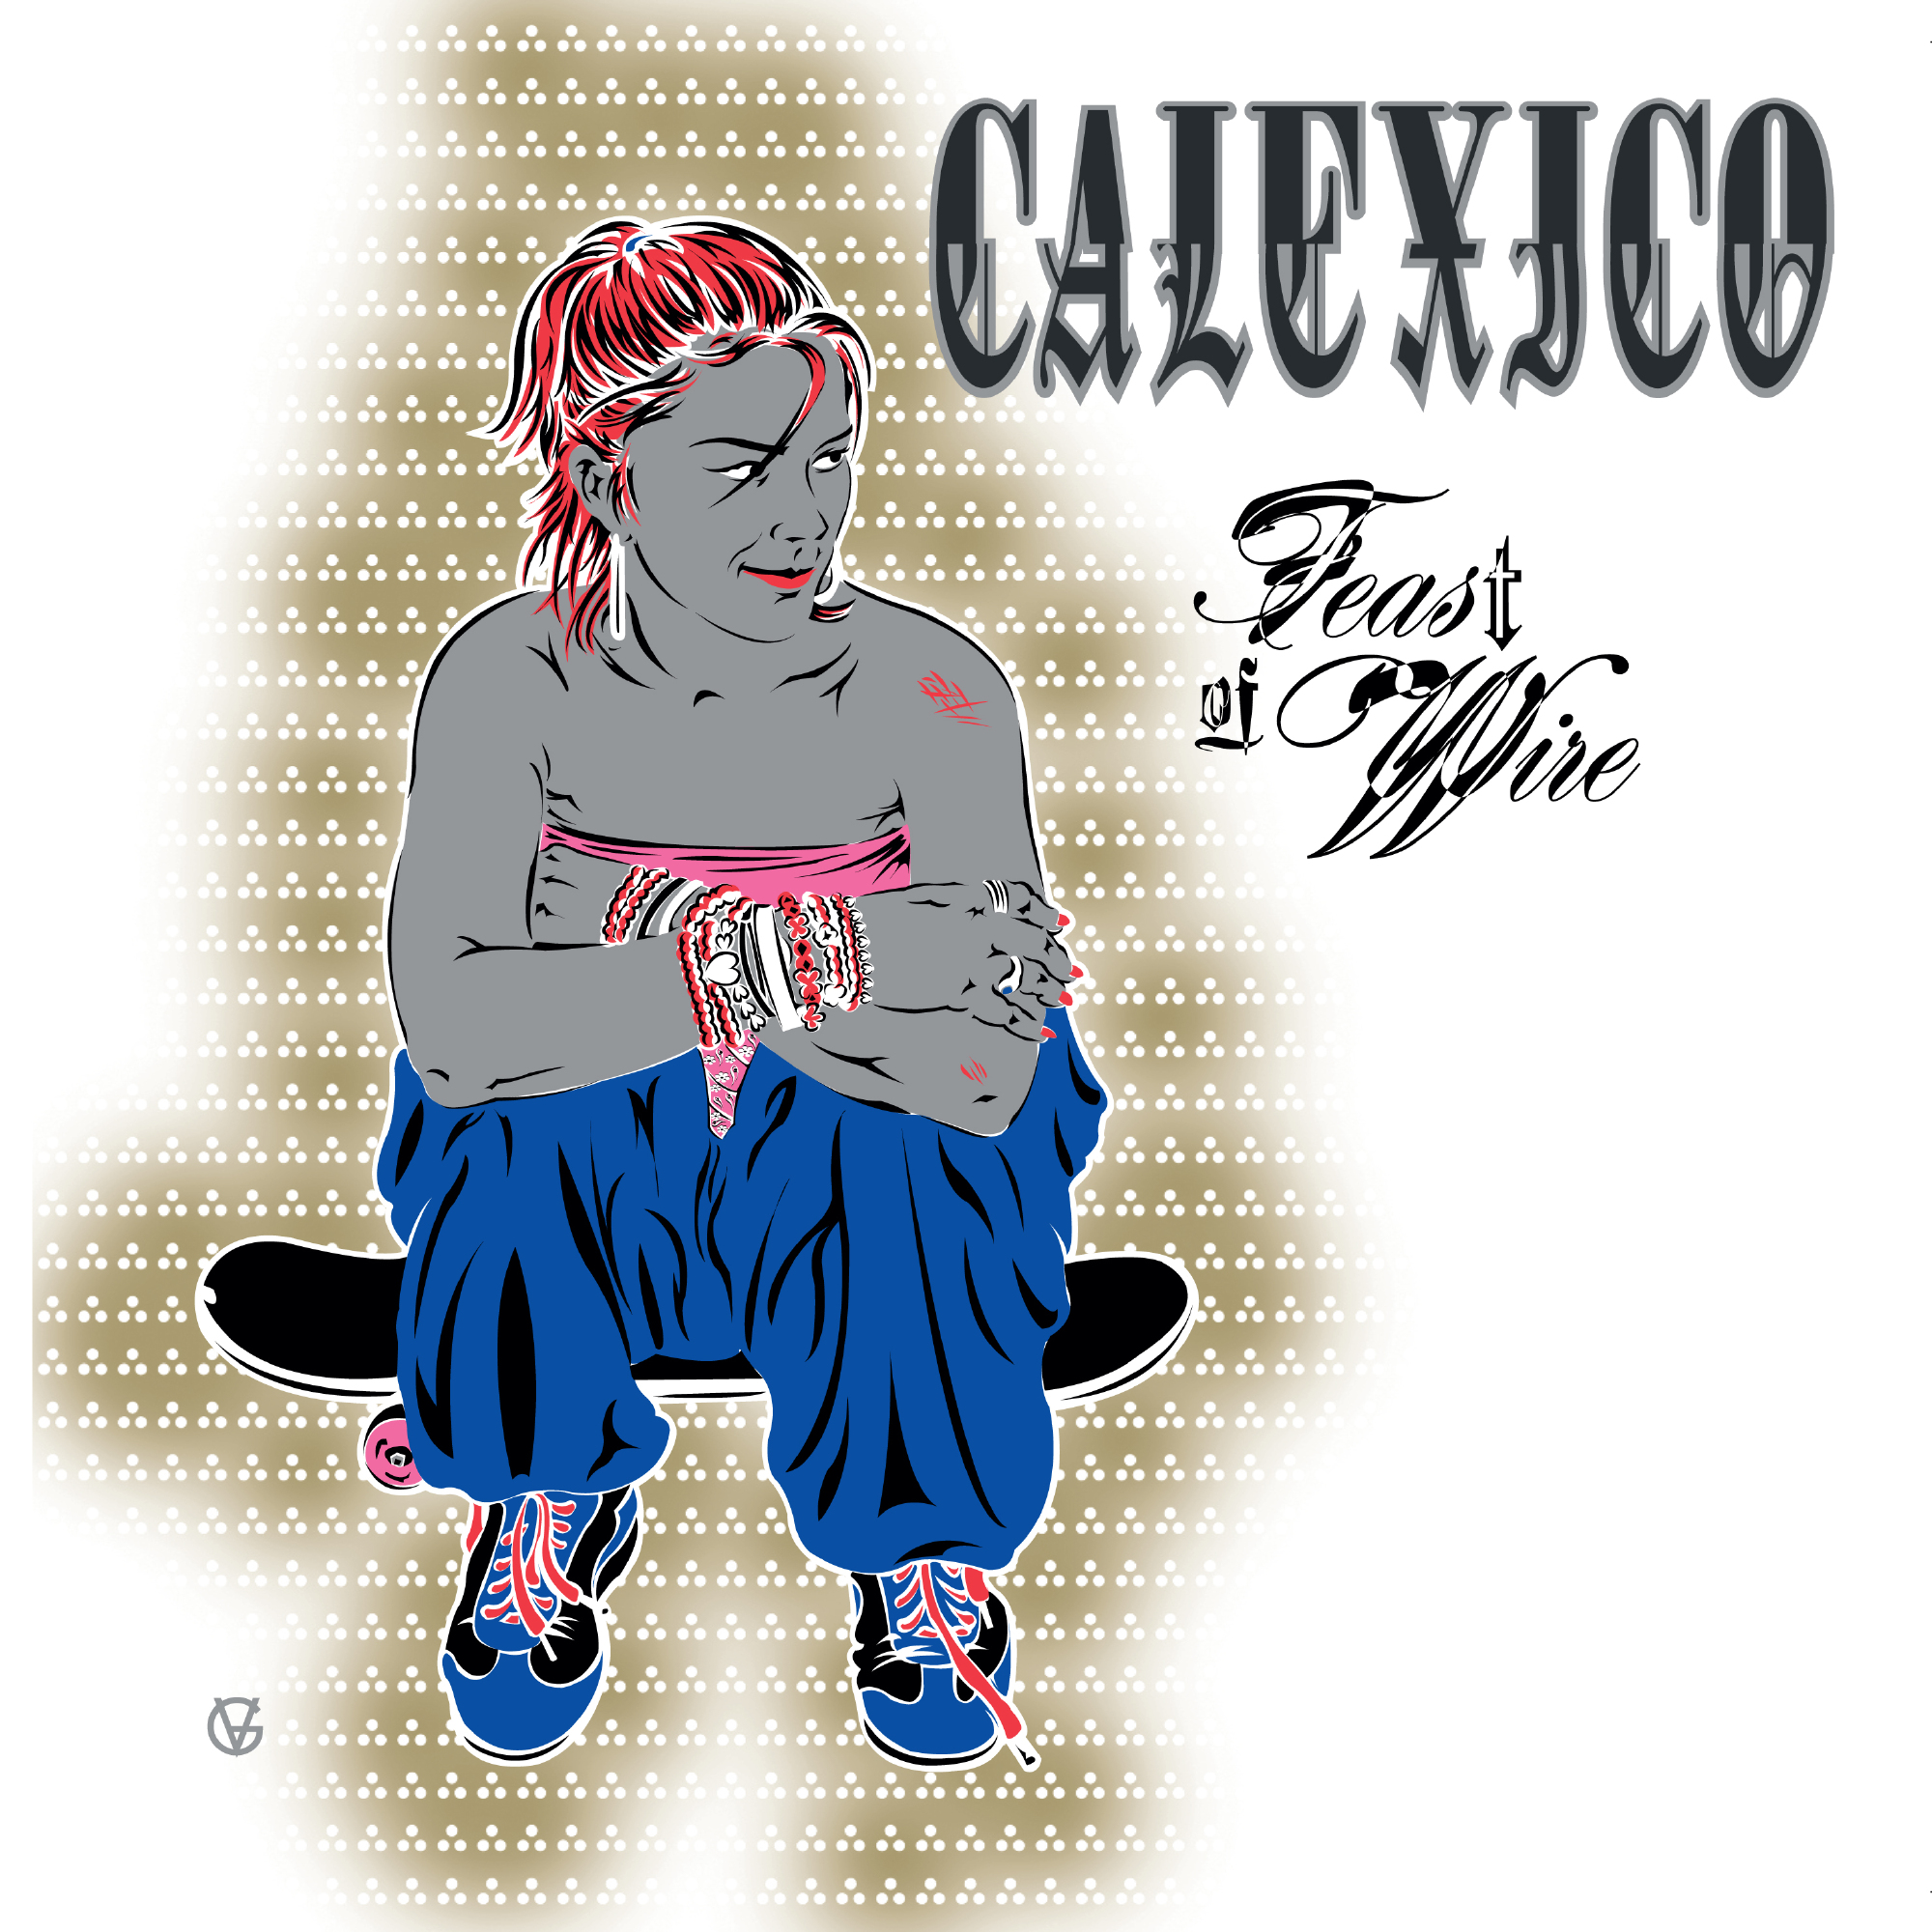 Release “Feast of Wire” by Calexico - Cover Art - MusicBrainz